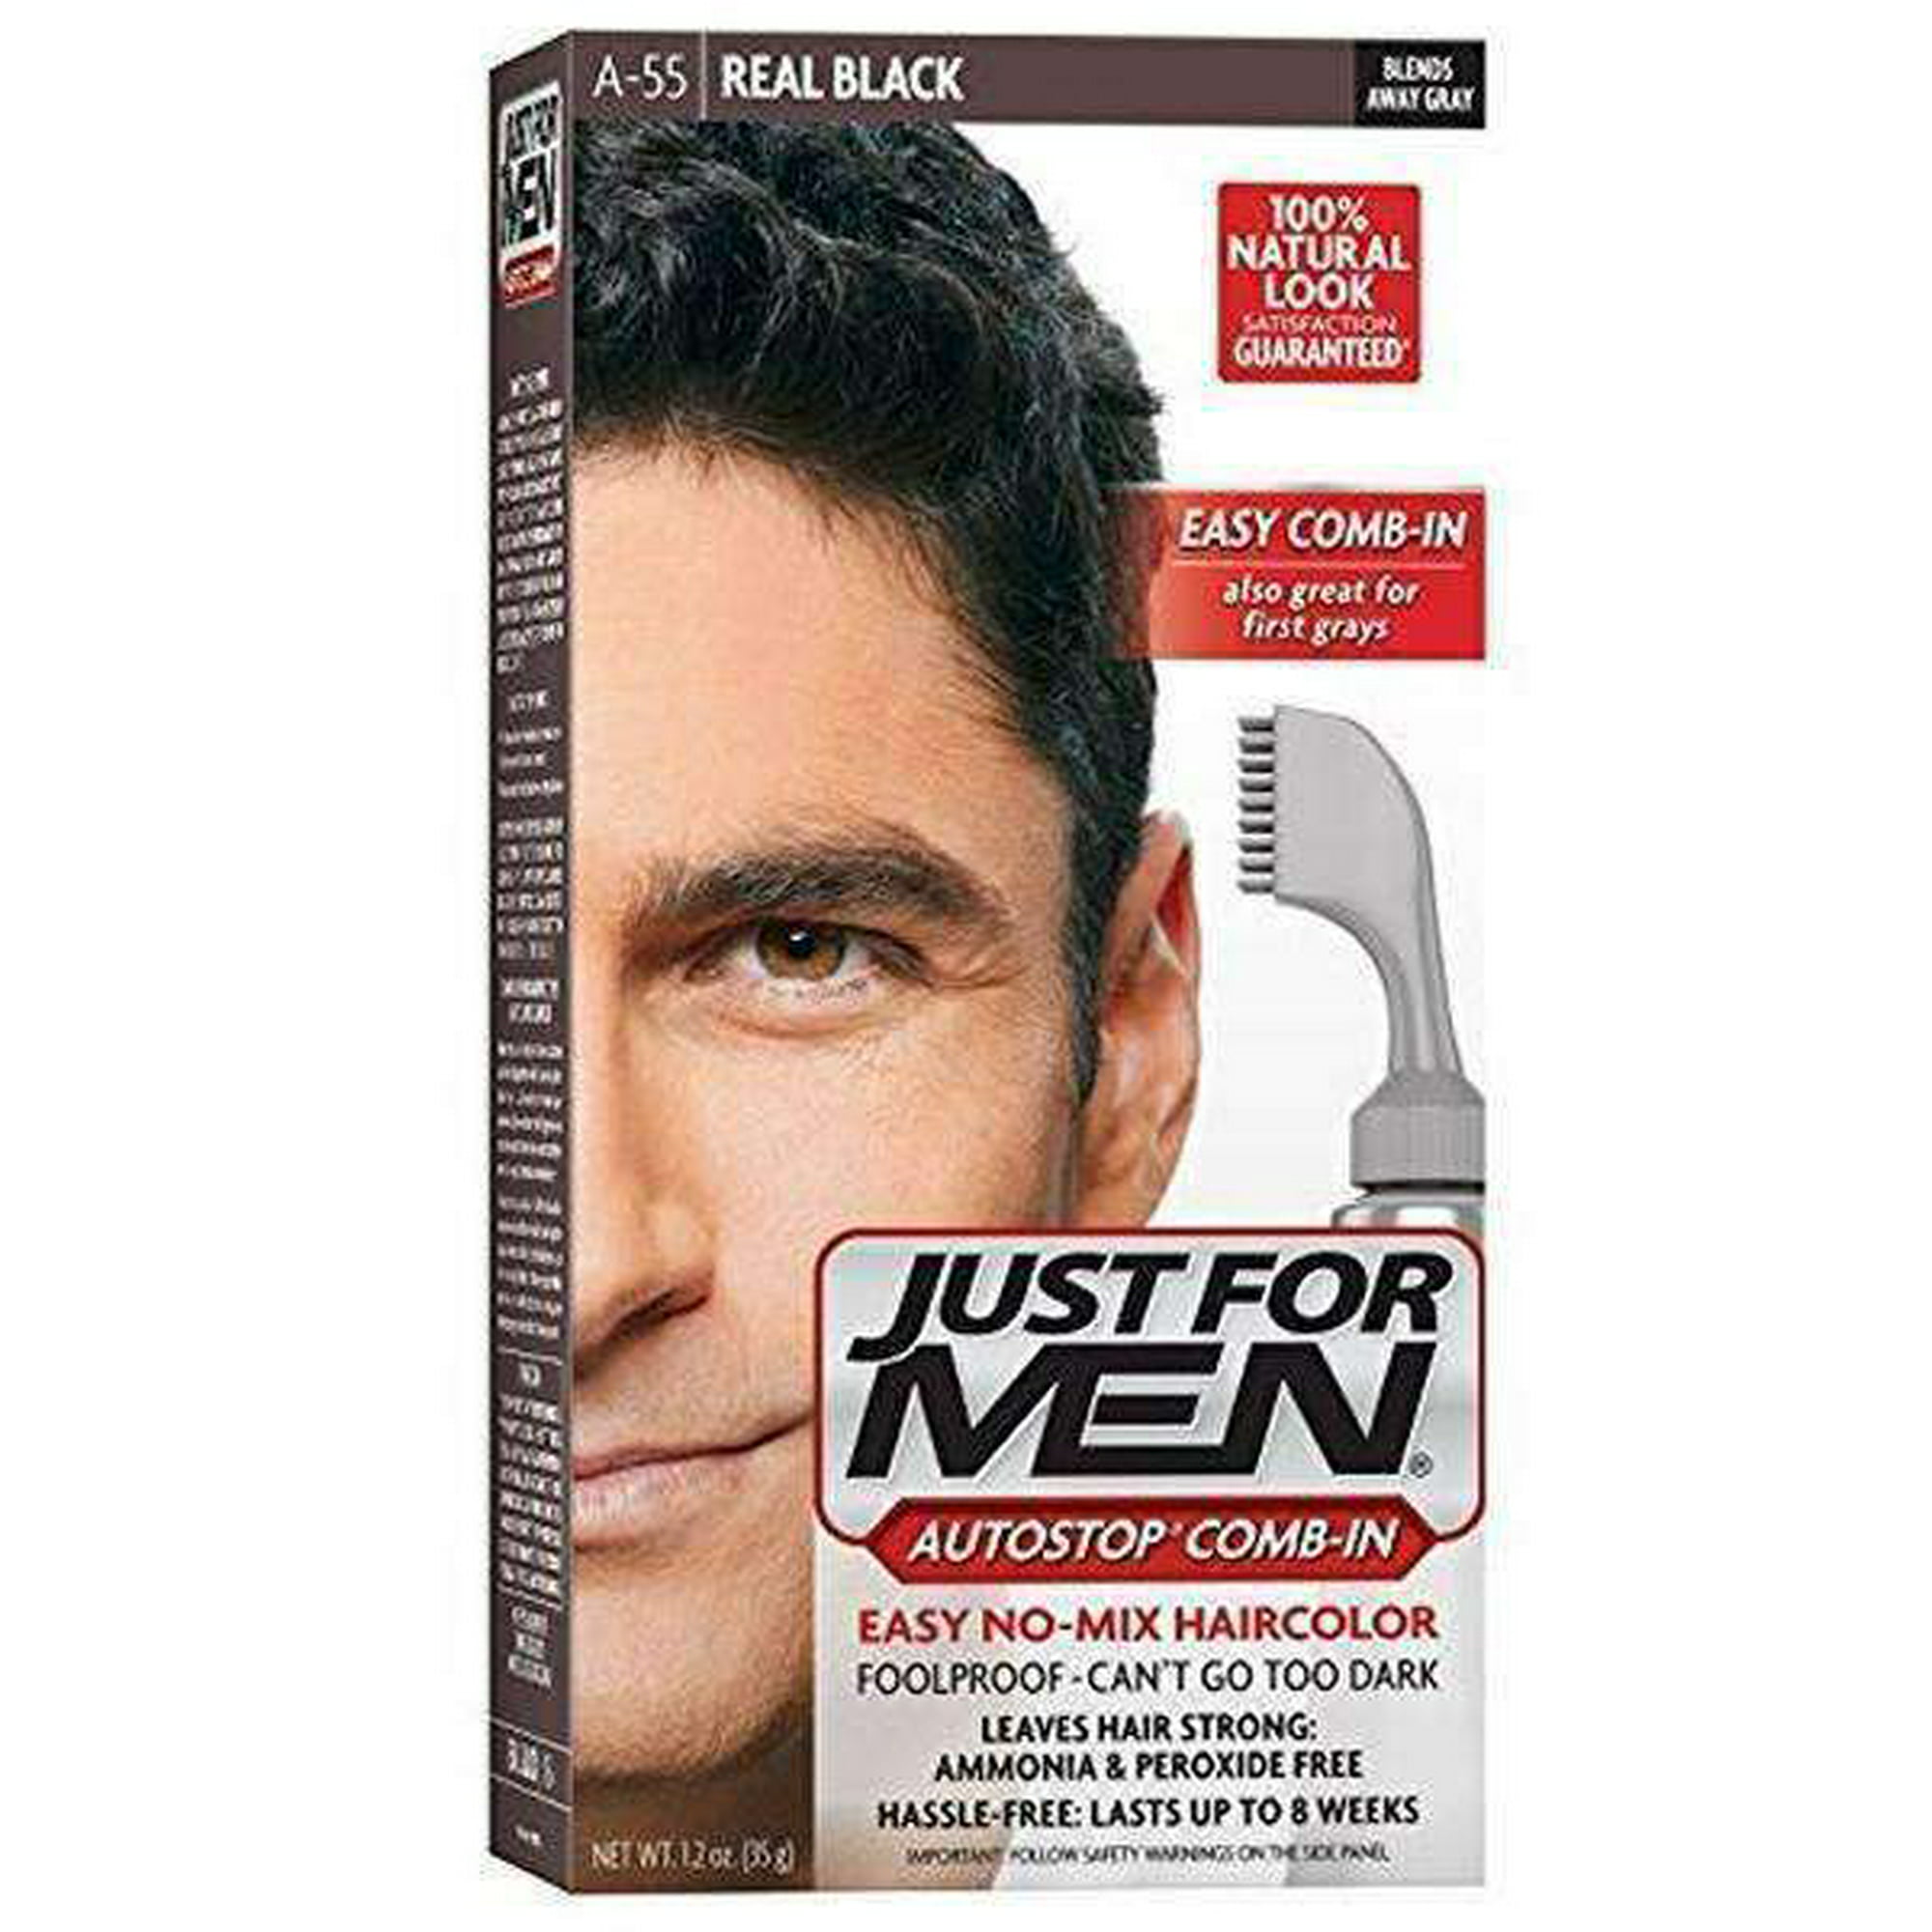 Just For Men Autostop Comb-In Hair Colour- A-55 Real Black | Walmart Canada